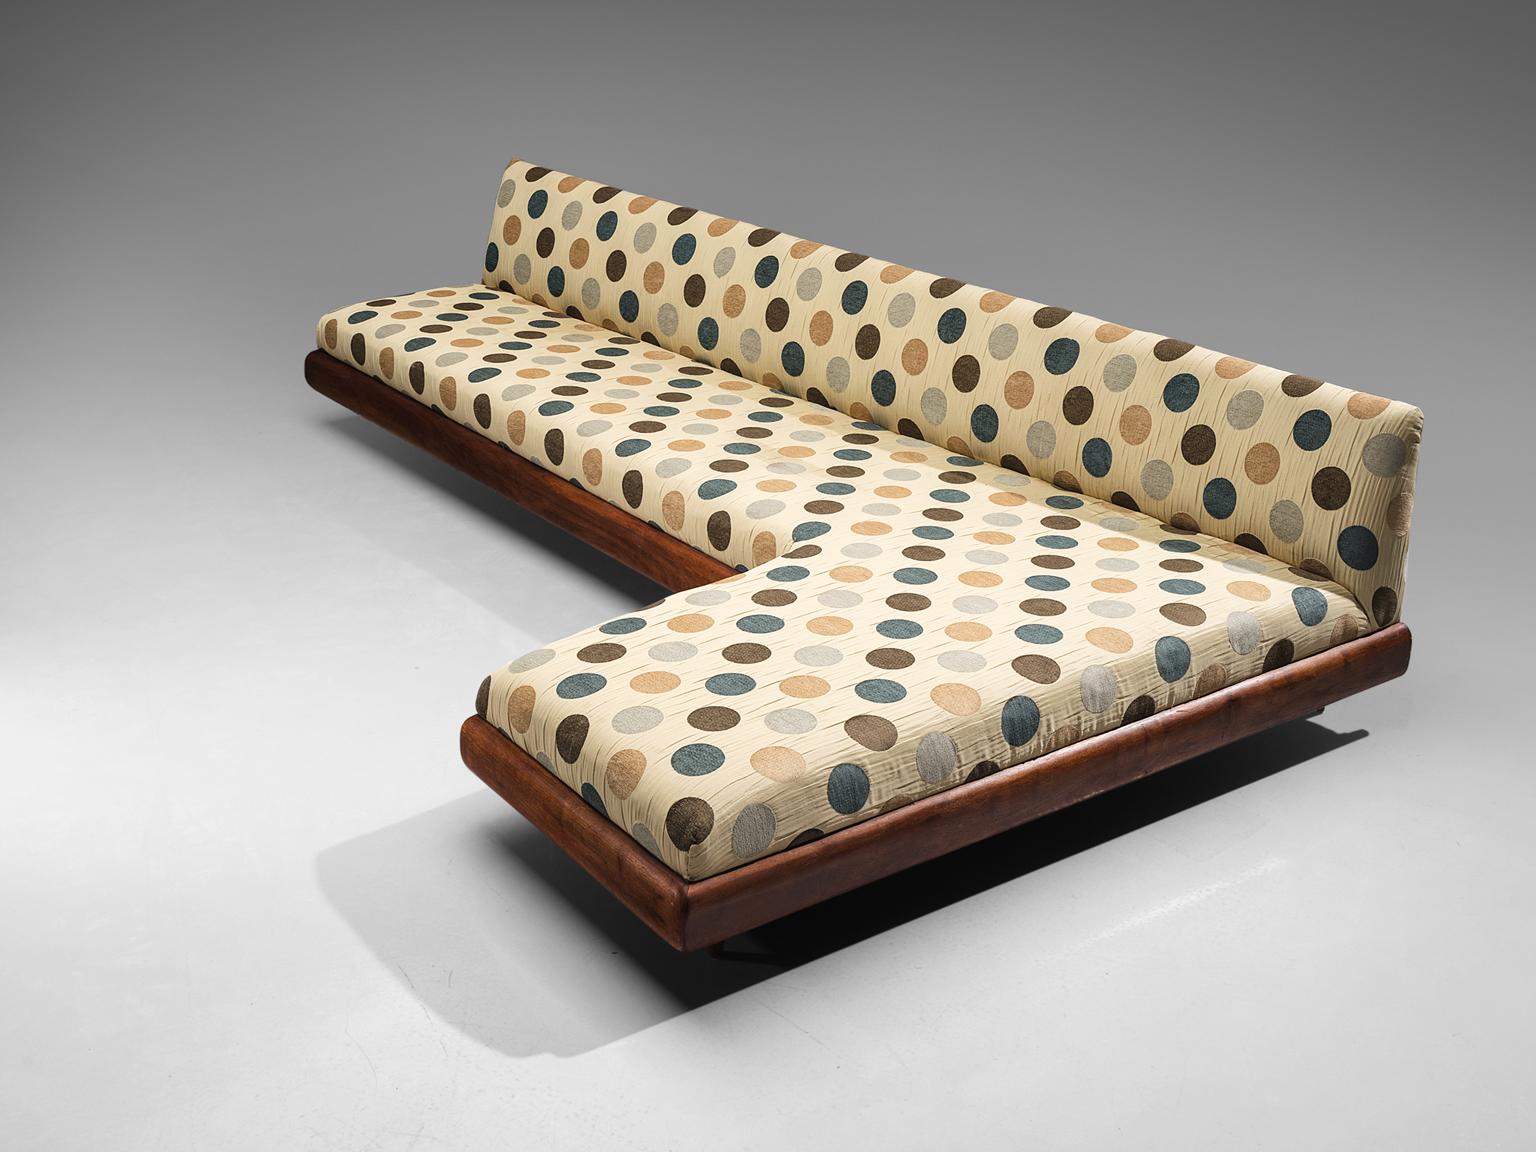 Adrian Pearsall 'Boomerang' sofa with polka dot upholstery and walnut, United States, 1960s. 

This boomerang sofa has a modern shape and sinuous lines which create a comfortable and appealing look. The sofa is a great addition to a living area or